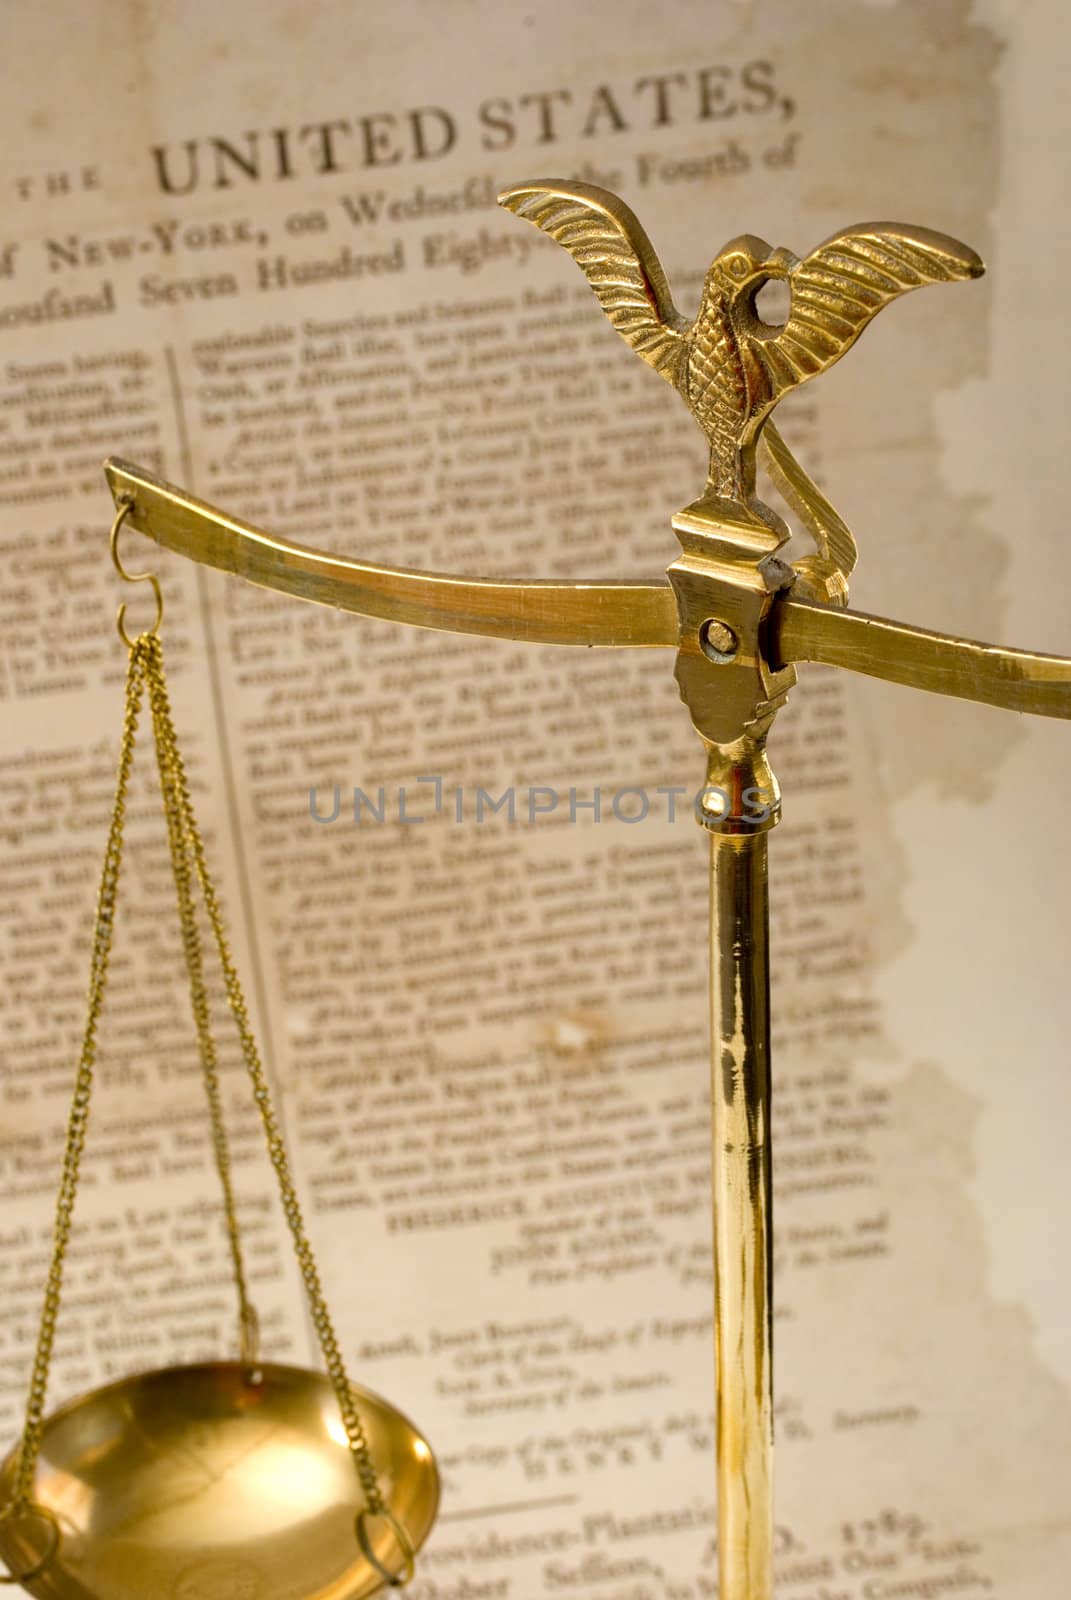 Scales of justice and Bill of Rights. Concepts of justice, law, history. Focus is on eagle.